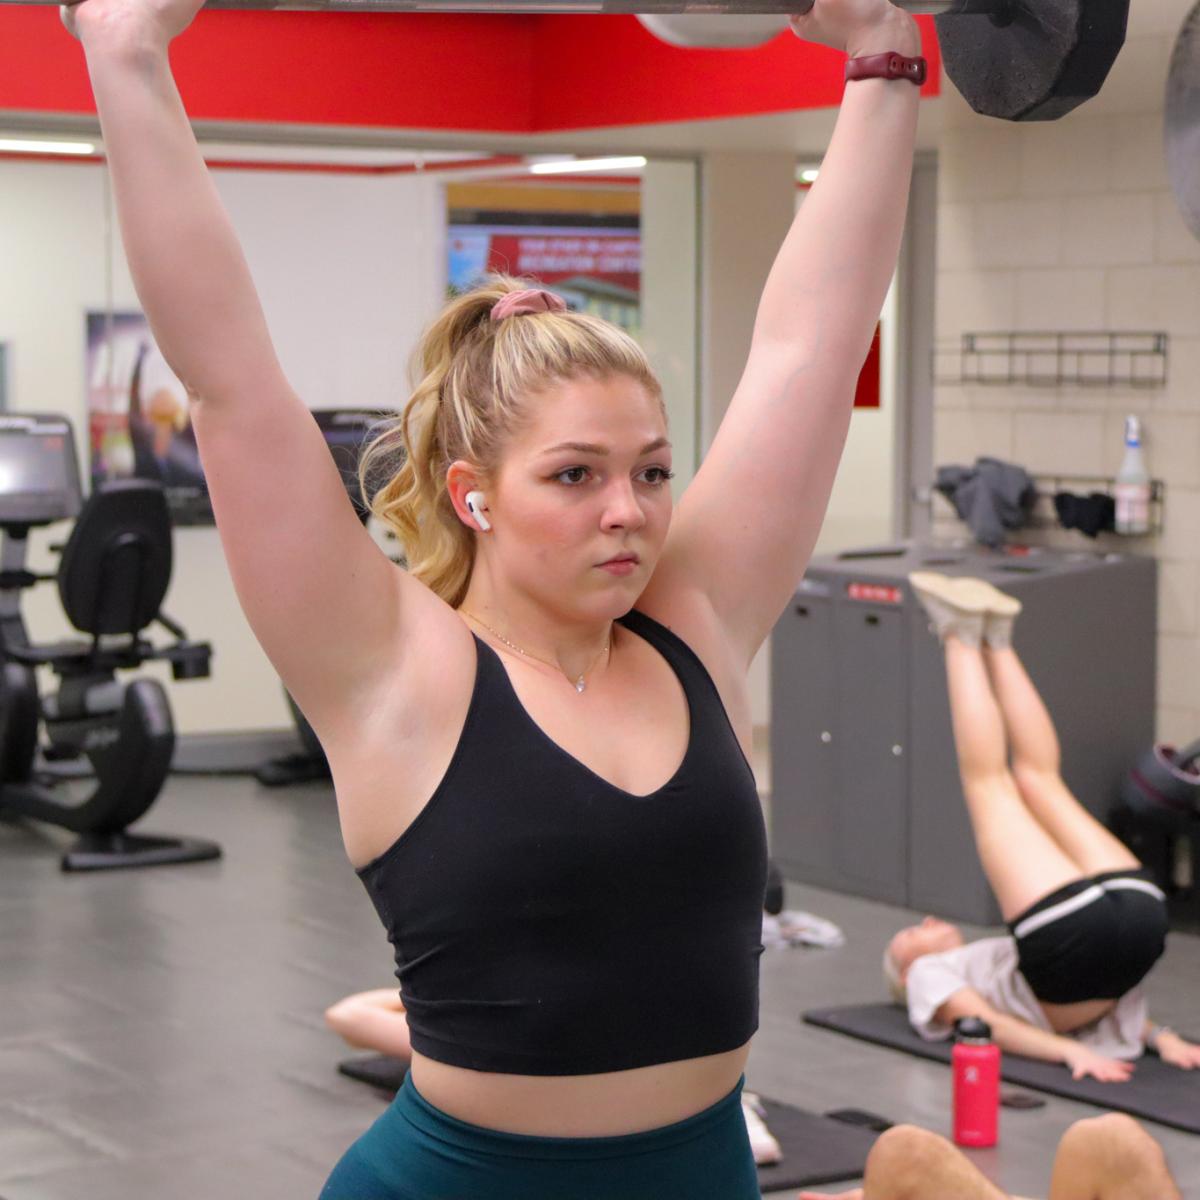 A woman lifts weights in the Strength Training and Condition Room